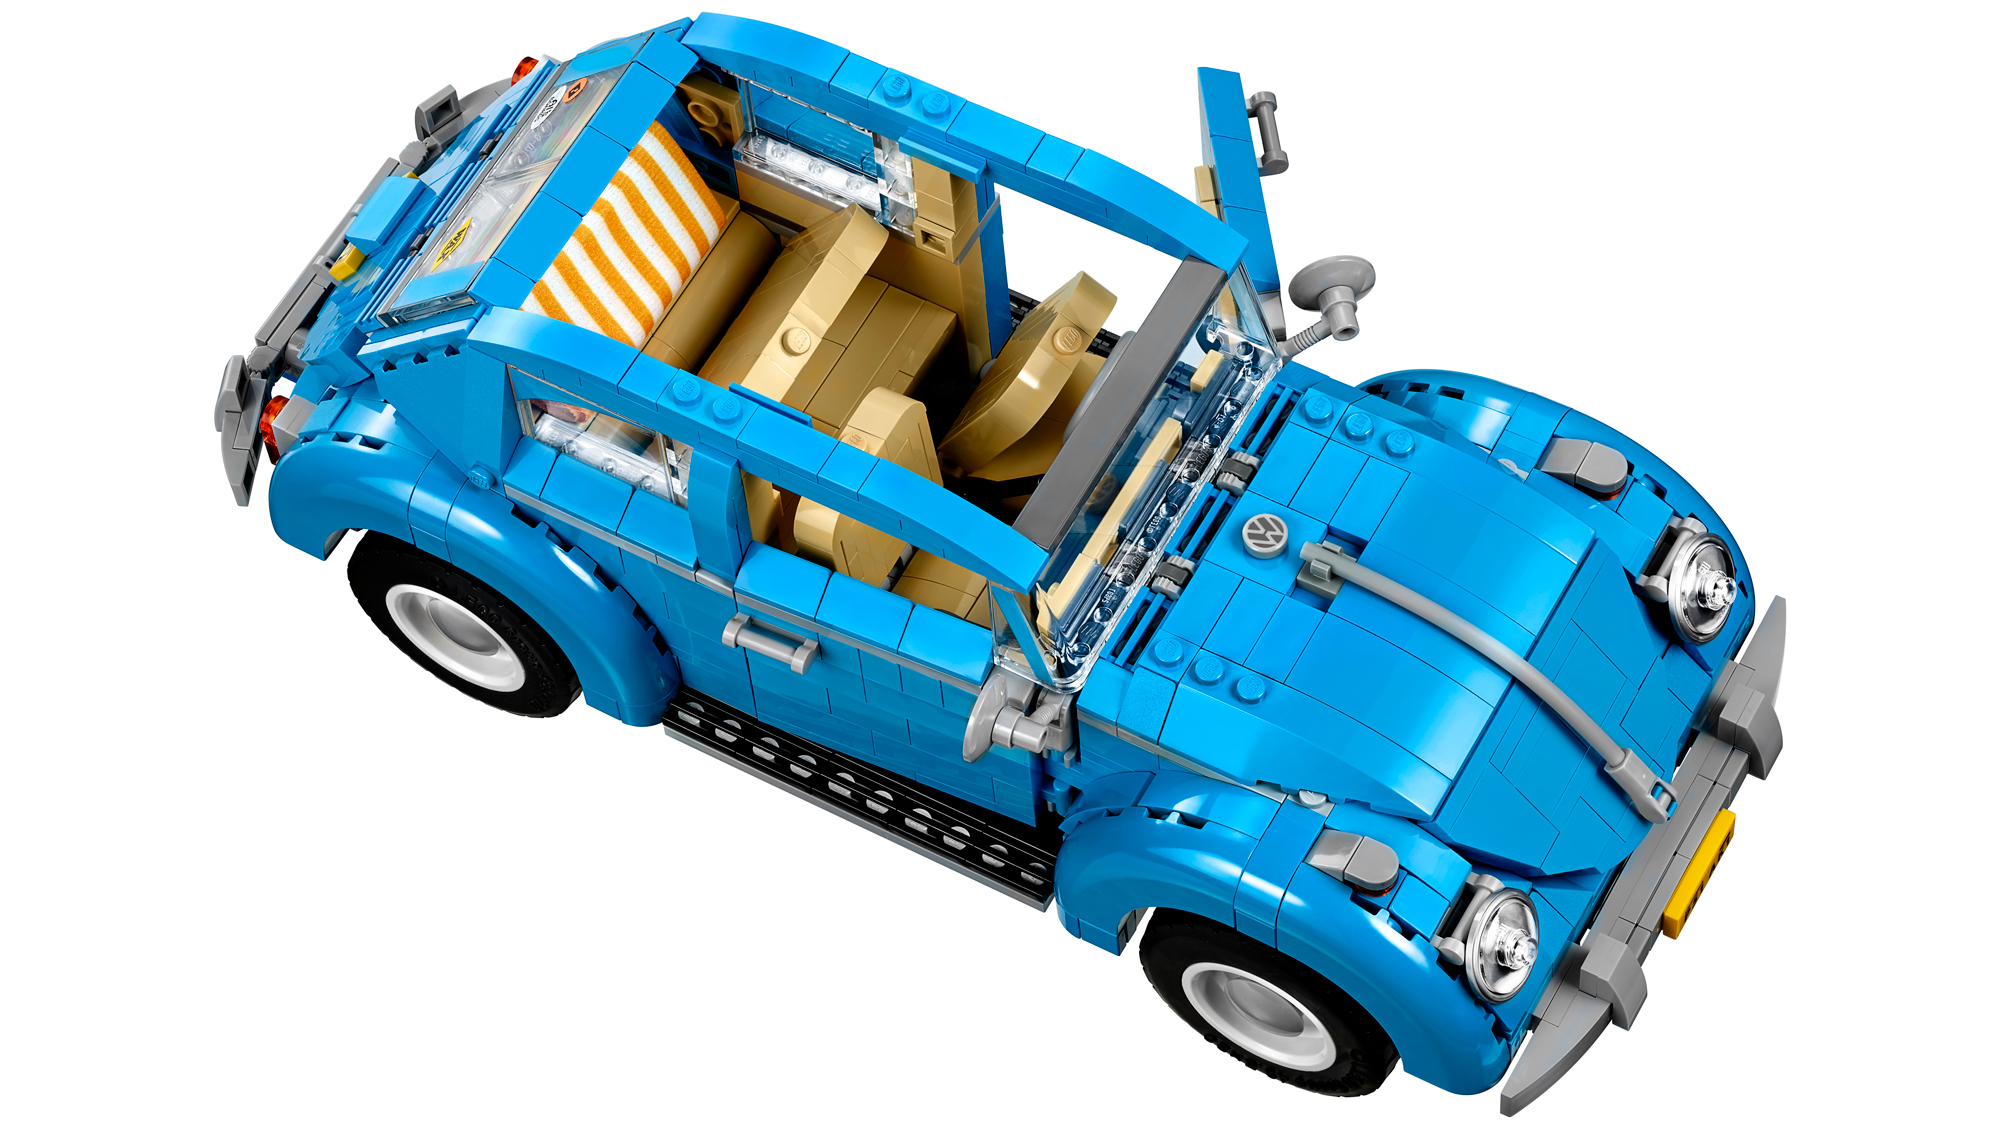 LEGO’s Second Attempt At A Classic ’60s VW Beetle Has Finally Perfected Its Curves